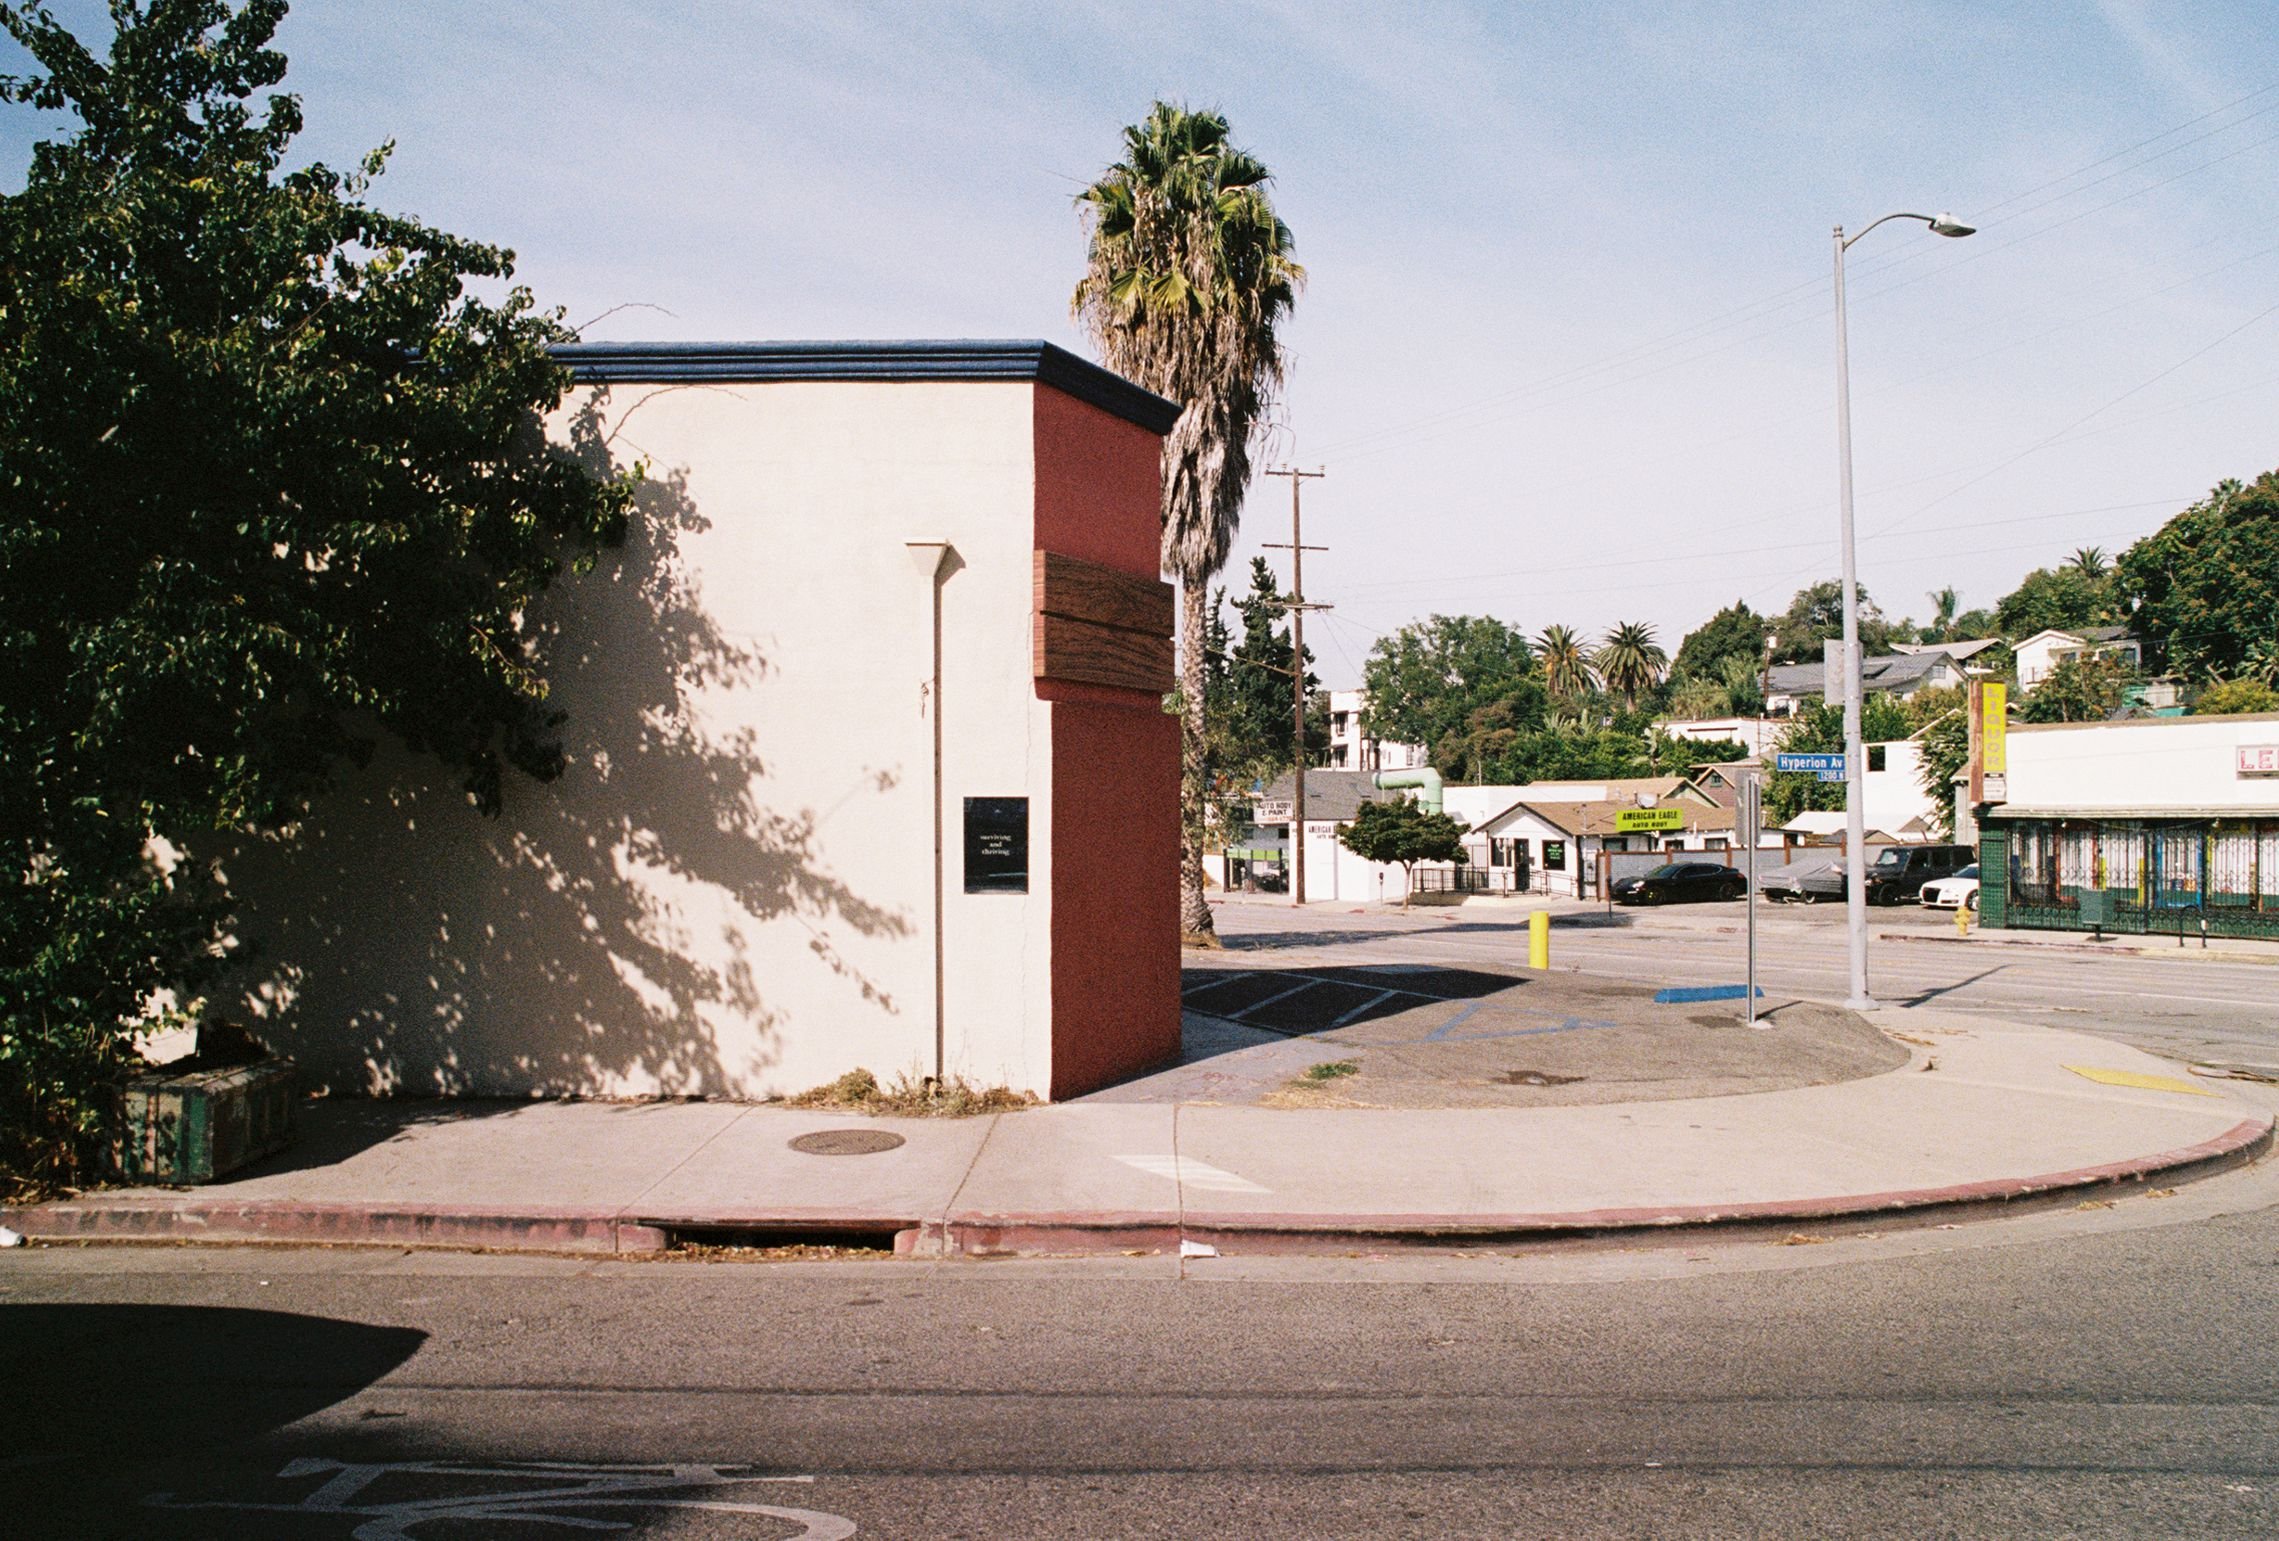 "surviving and thriving", Hyperion Ave (Silverlake)